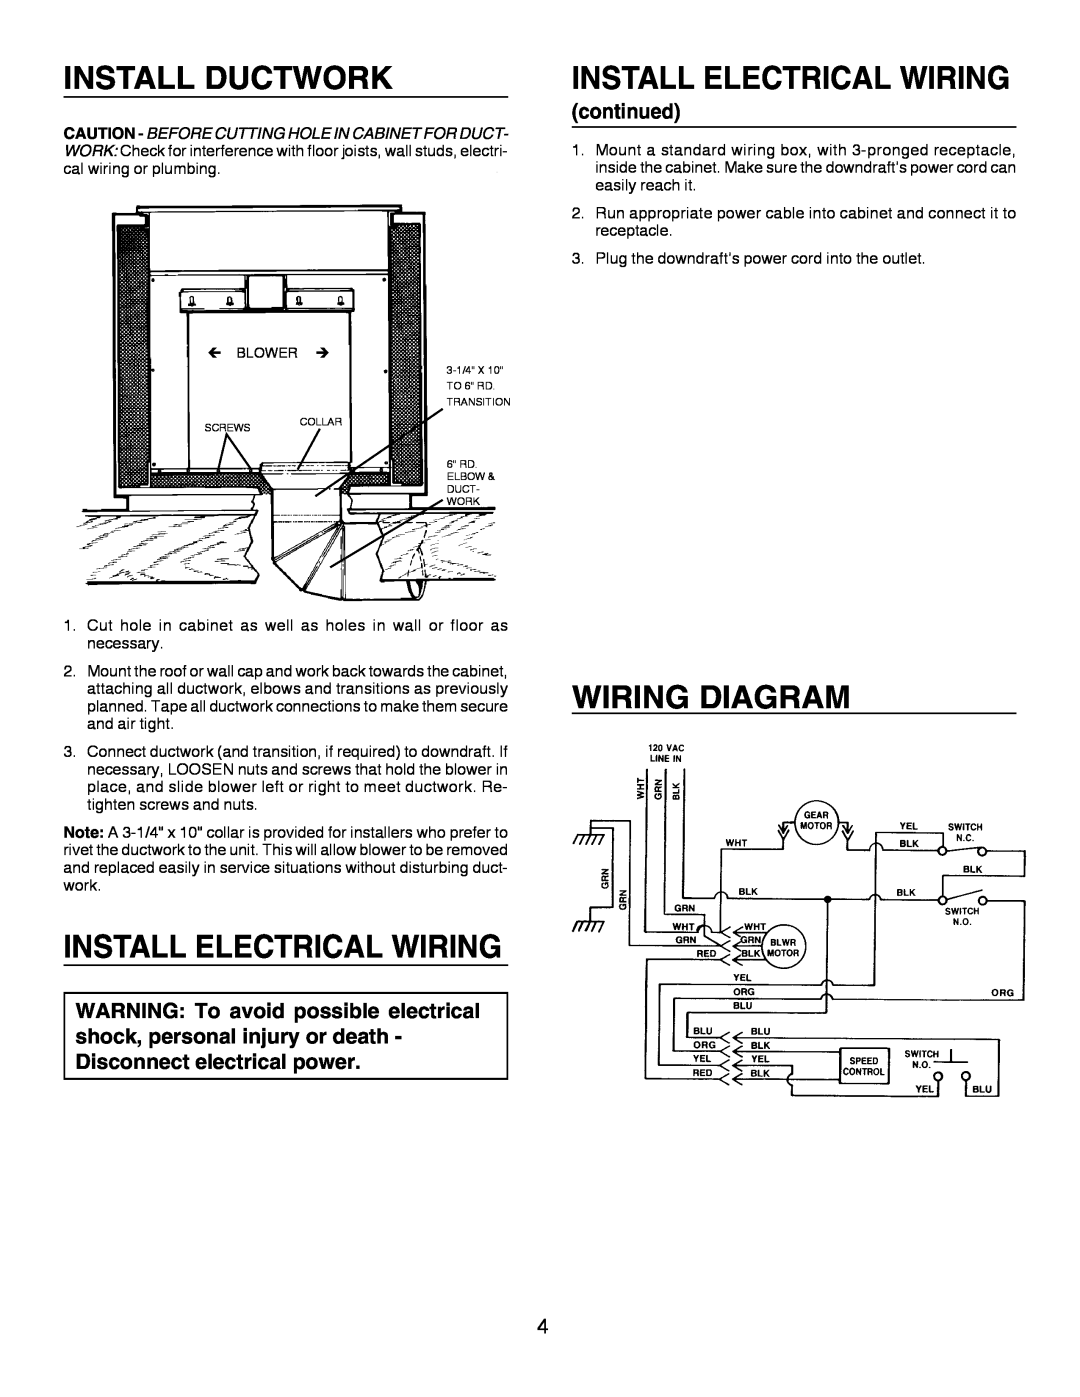 Broan 273003 warranty Install Ductwork, Install Electrical Wiring, Wiring Diagram, continued 